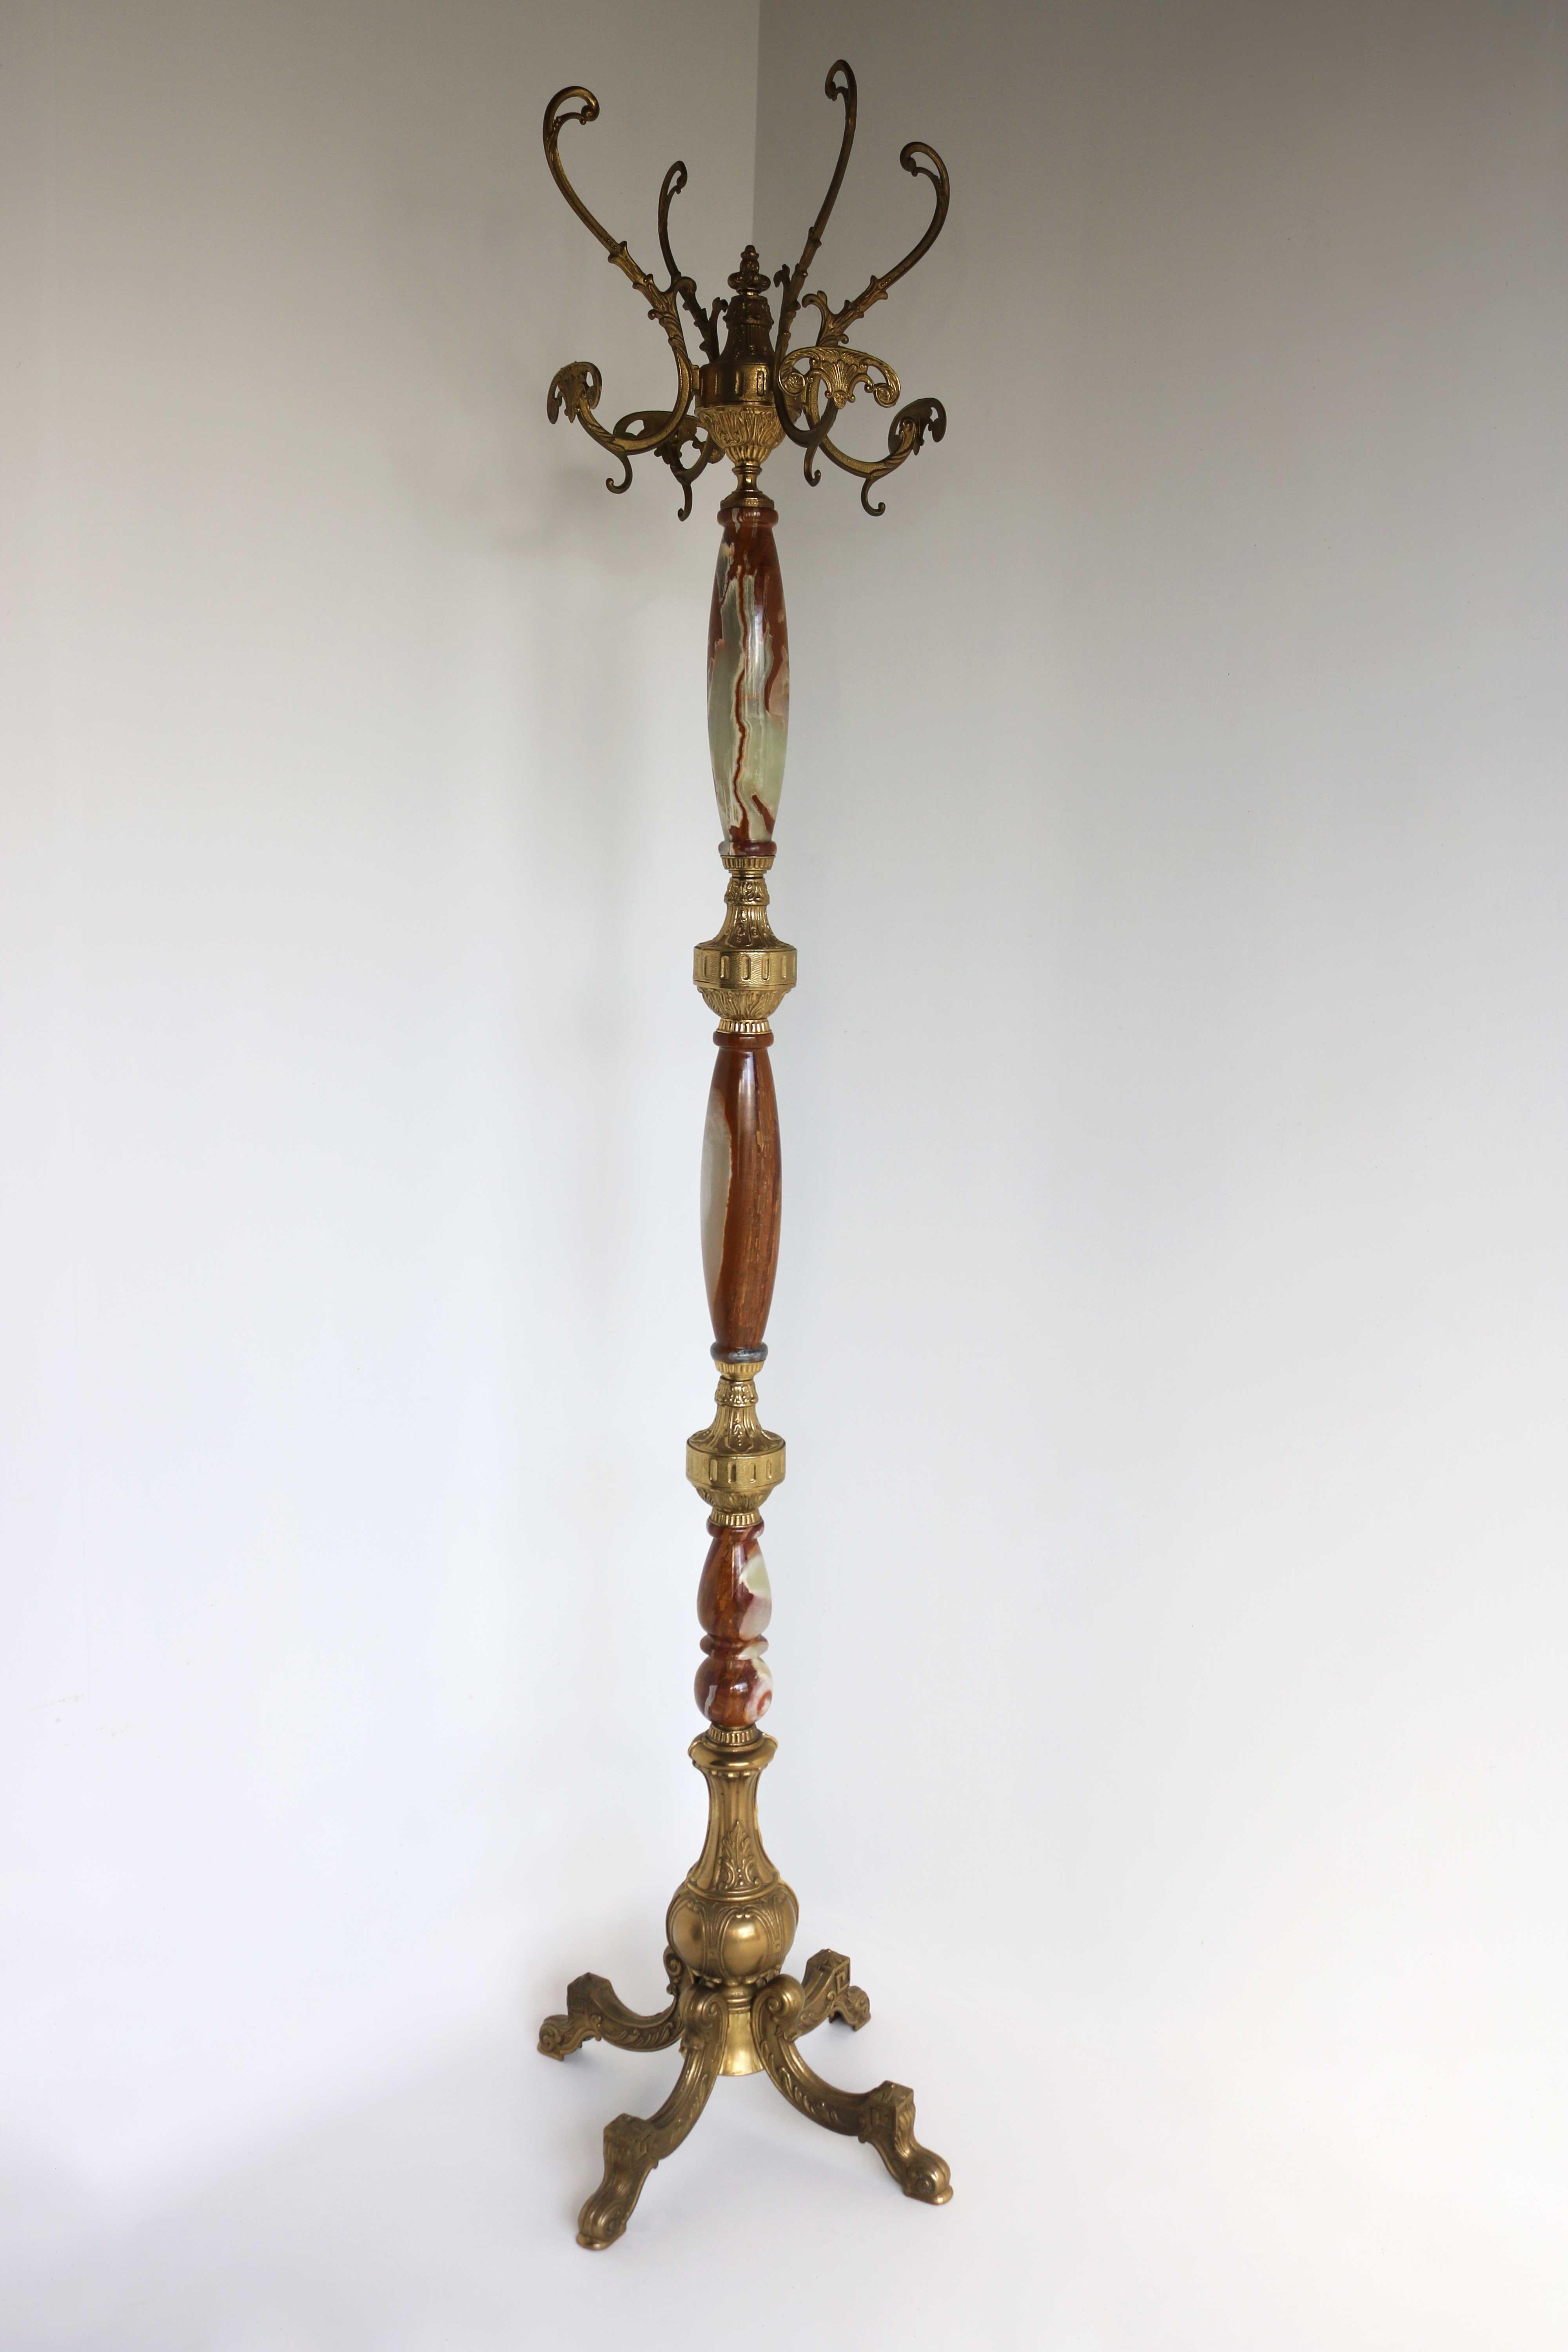 Italian ornate antique brass & onyx marble coat hat rack hall tree 1950s.

This high quality free standing, ornate hall tree dates to the 1950's. Is crafted from round onyx marble and casted brass and has numerous beautiful details. With a big